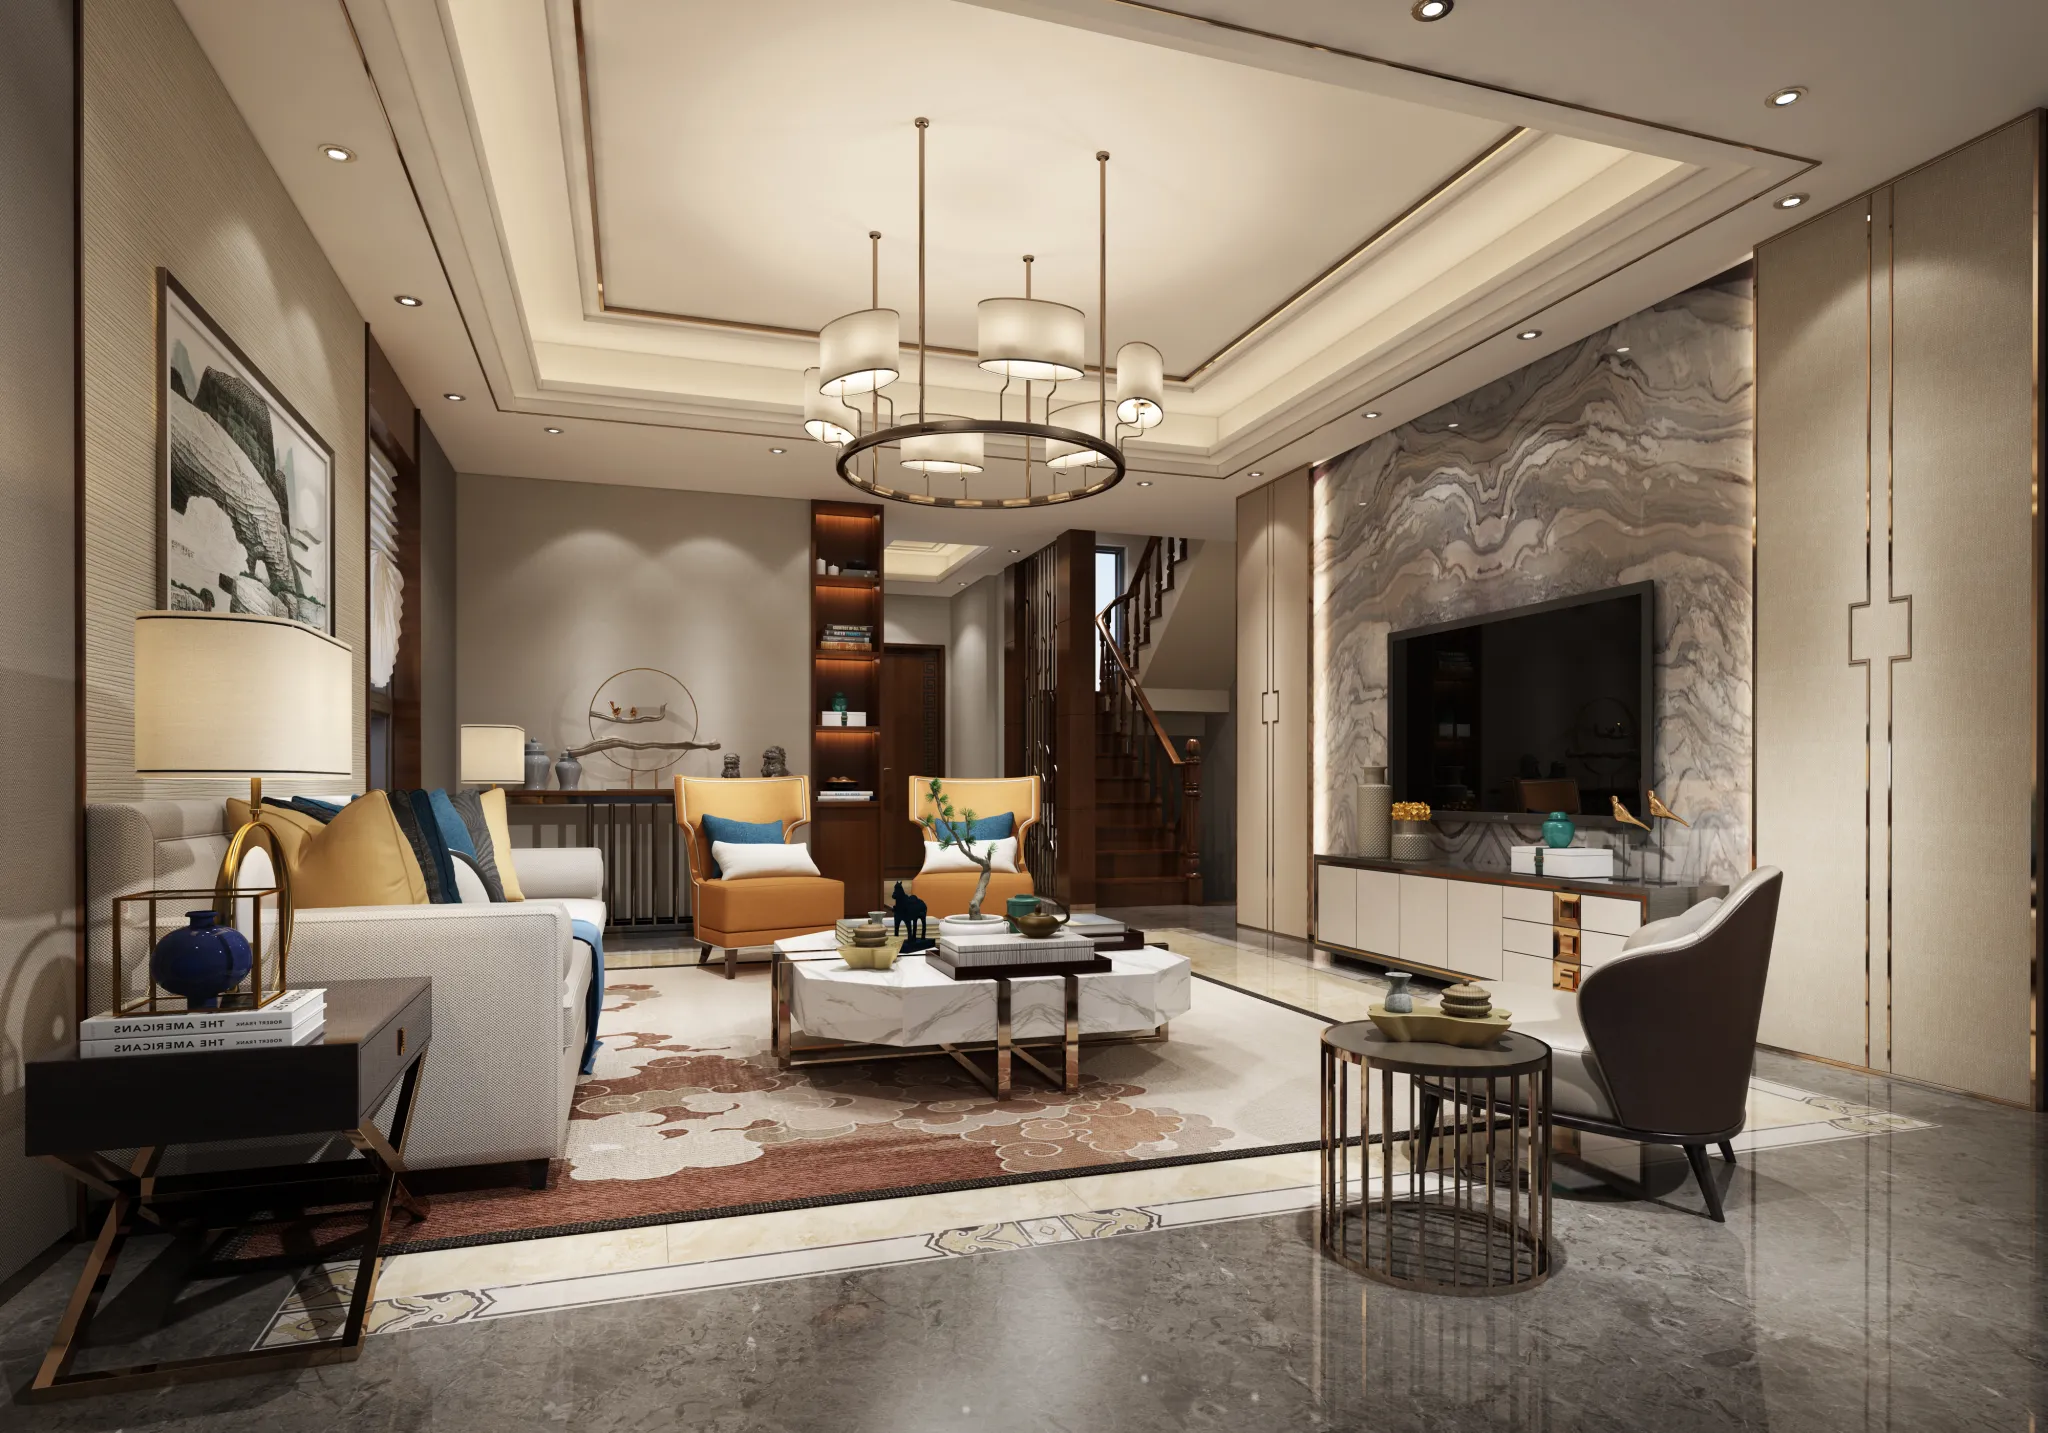 DESMOD INTERIOR 2021 (VRAY) – 4. LIVING ROOM – CHINESE – 051